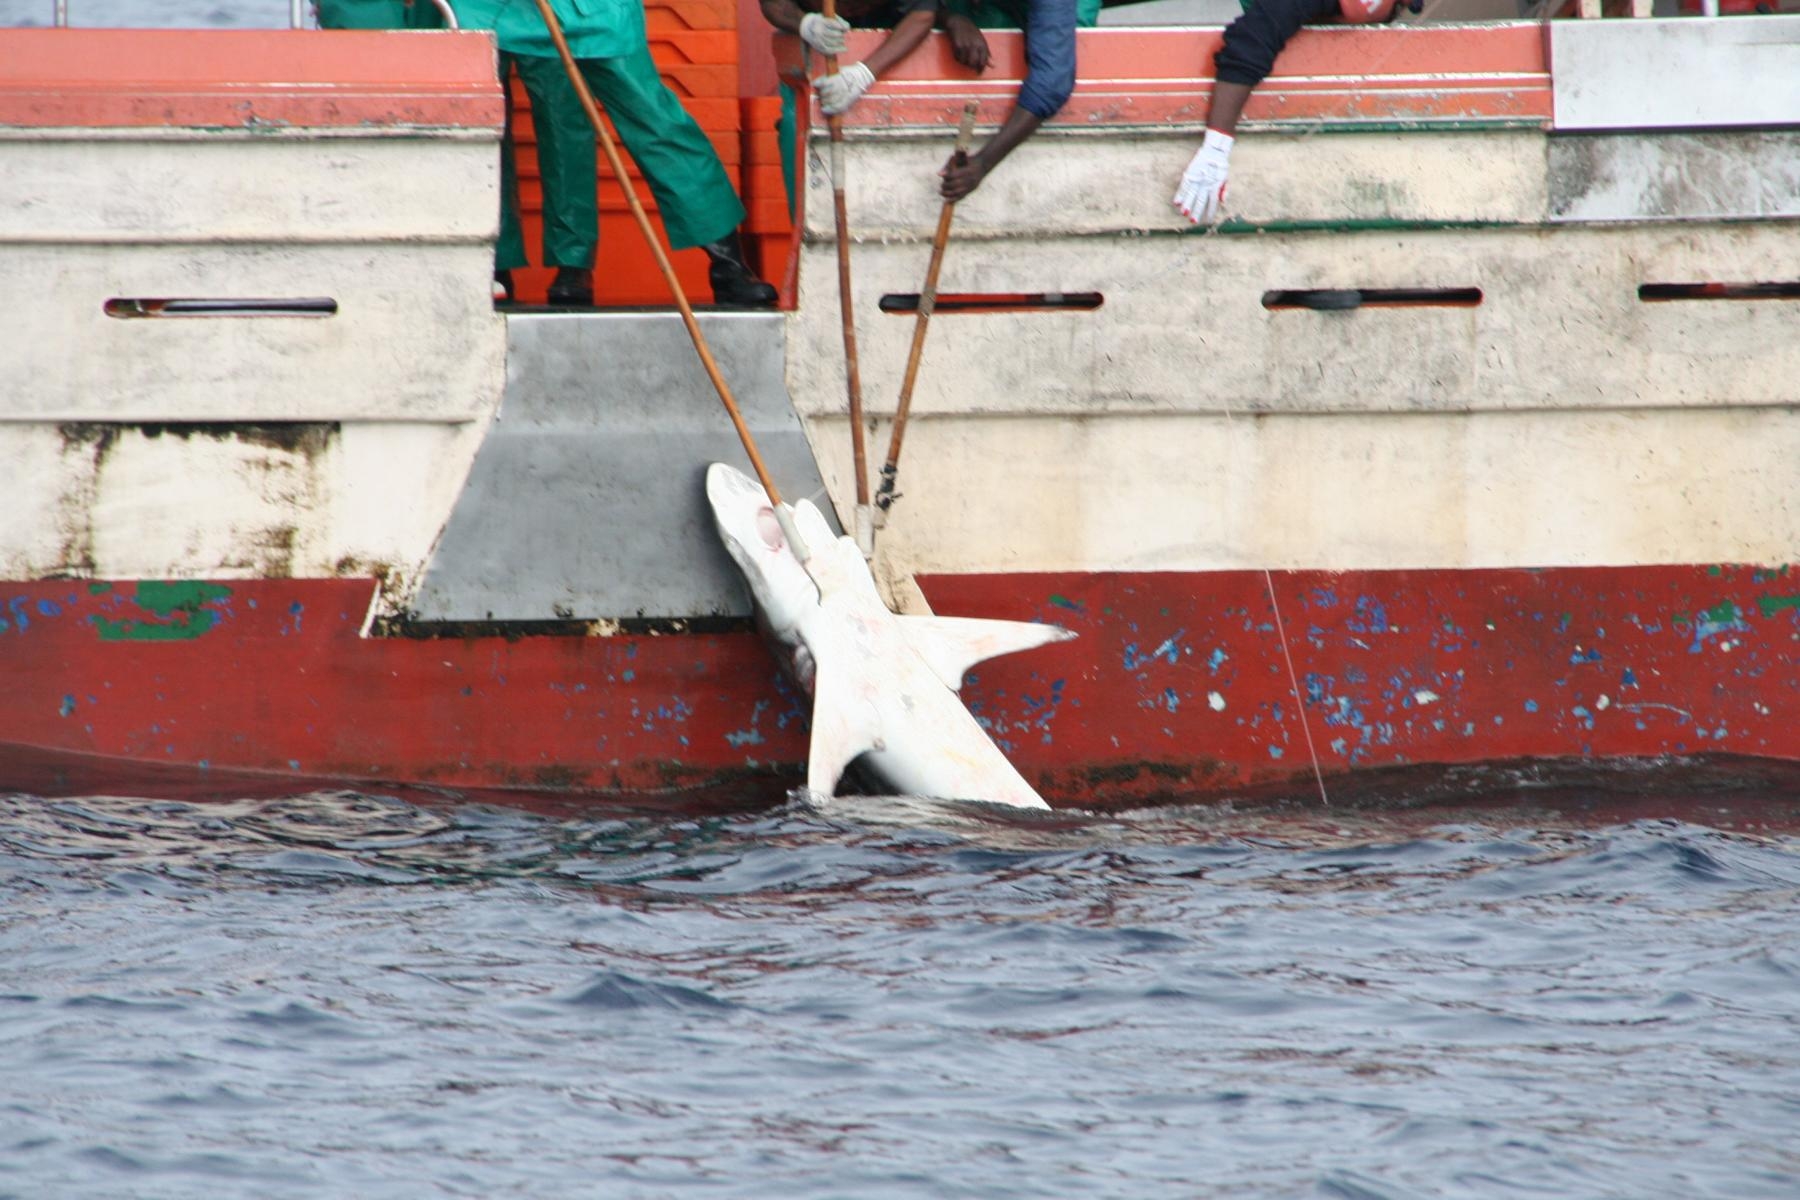 Fishing boat fished shark out of the water, pulled onto the deck, including larger species such as adult copper sharks, with iron grab hooks.
(c) Jens Höptner